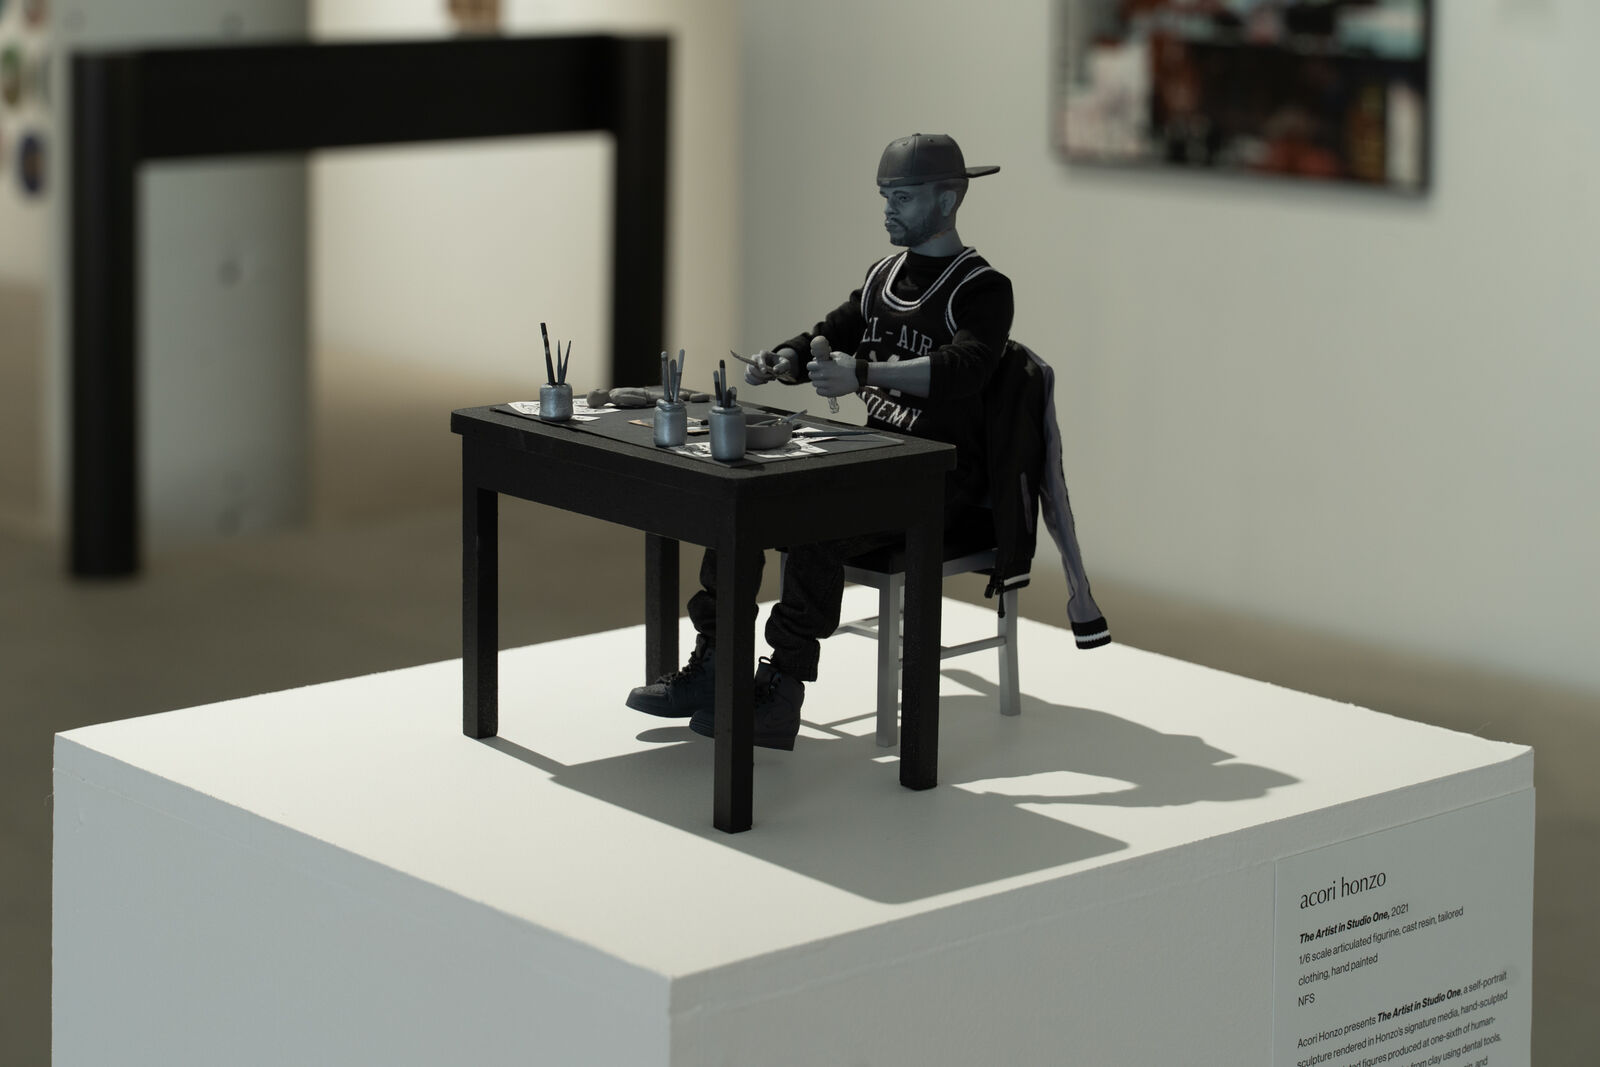 a miniature sculpture of a man seated creating art at a table sits on a pedestal